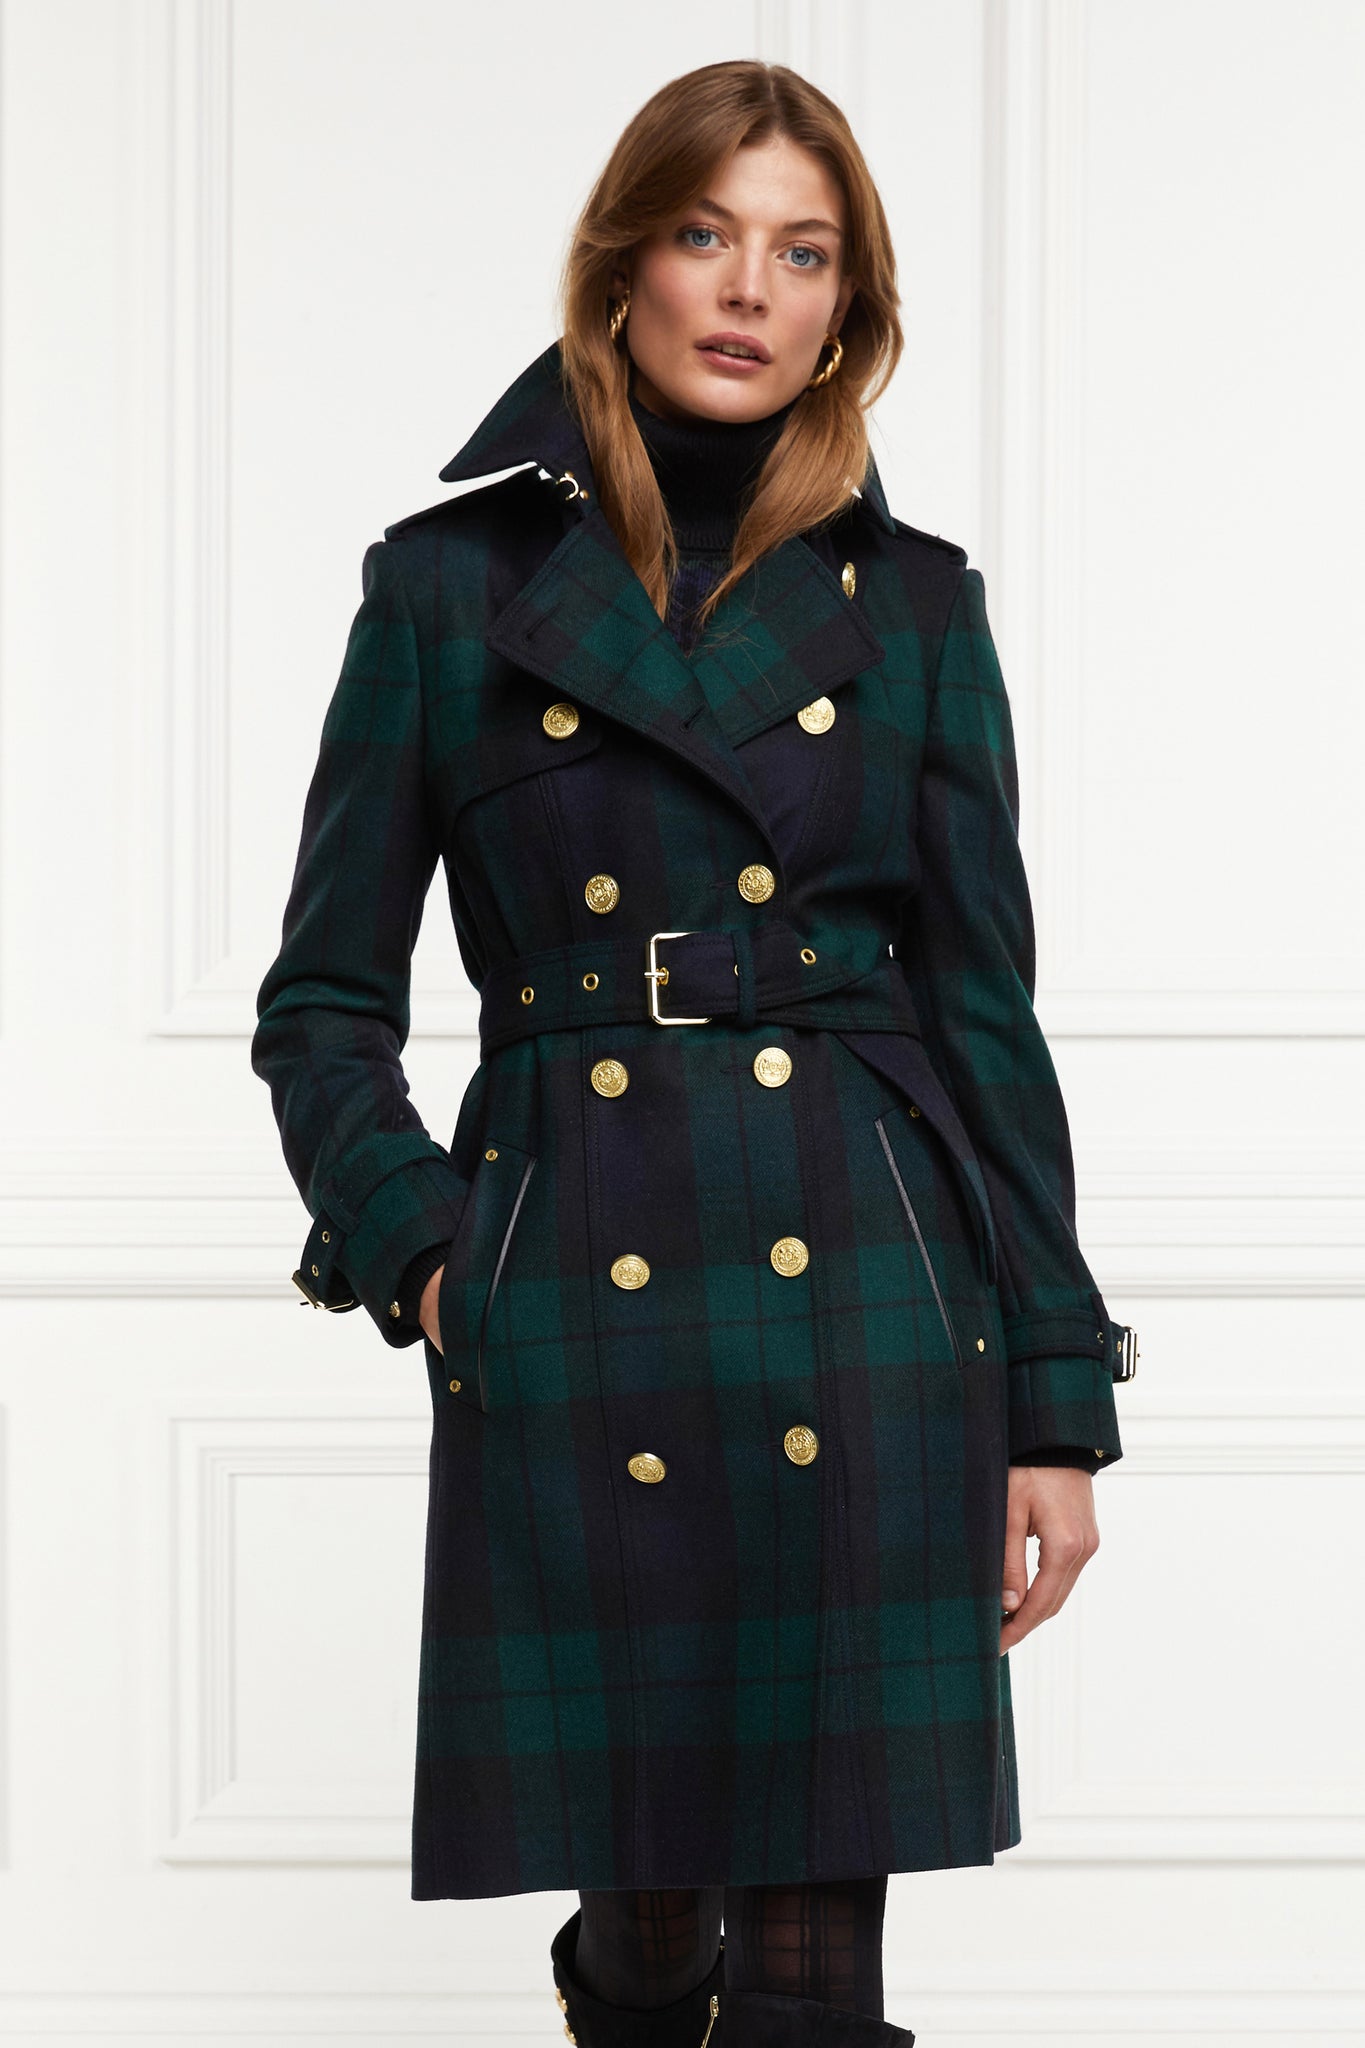 womens blackwatch tartan detailed with gold hardware knee length wool trench coat